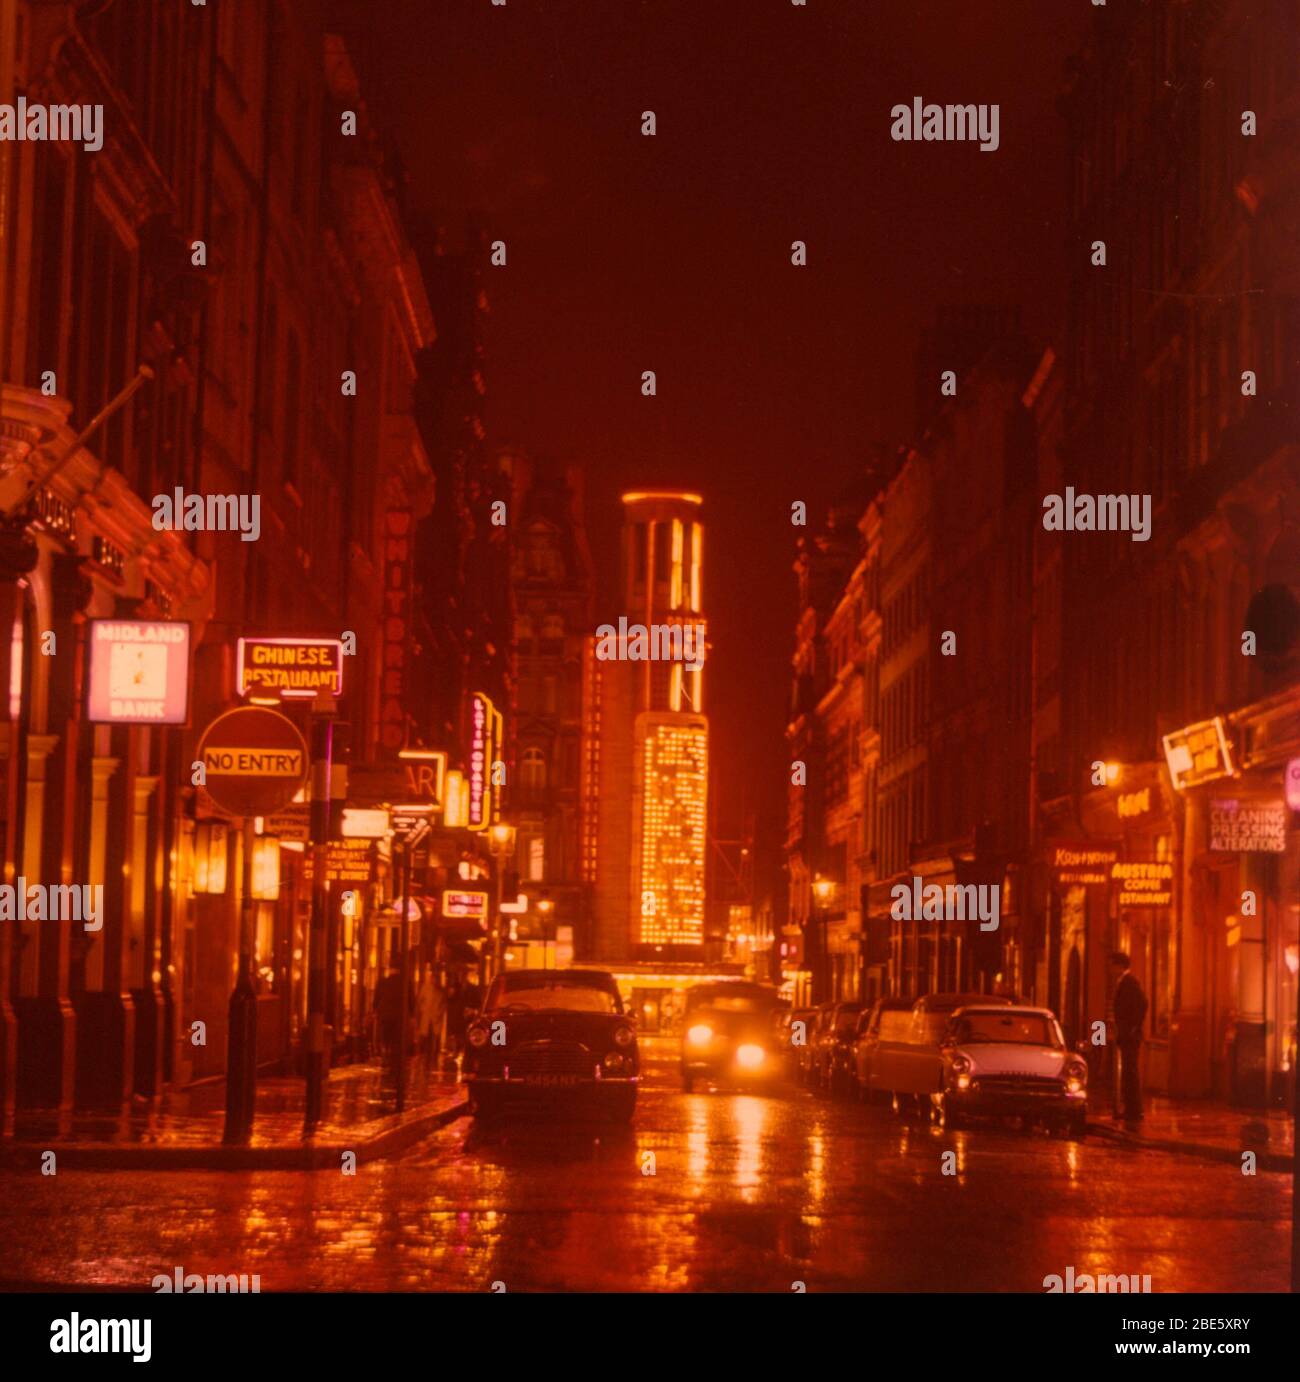 A shot taken in 1964 at night and in the rain, looking down Rupert Street in London's Soho with the Prince of Wales Theatre at the end and the neon lights reflecting in the puddles. Stock Photo